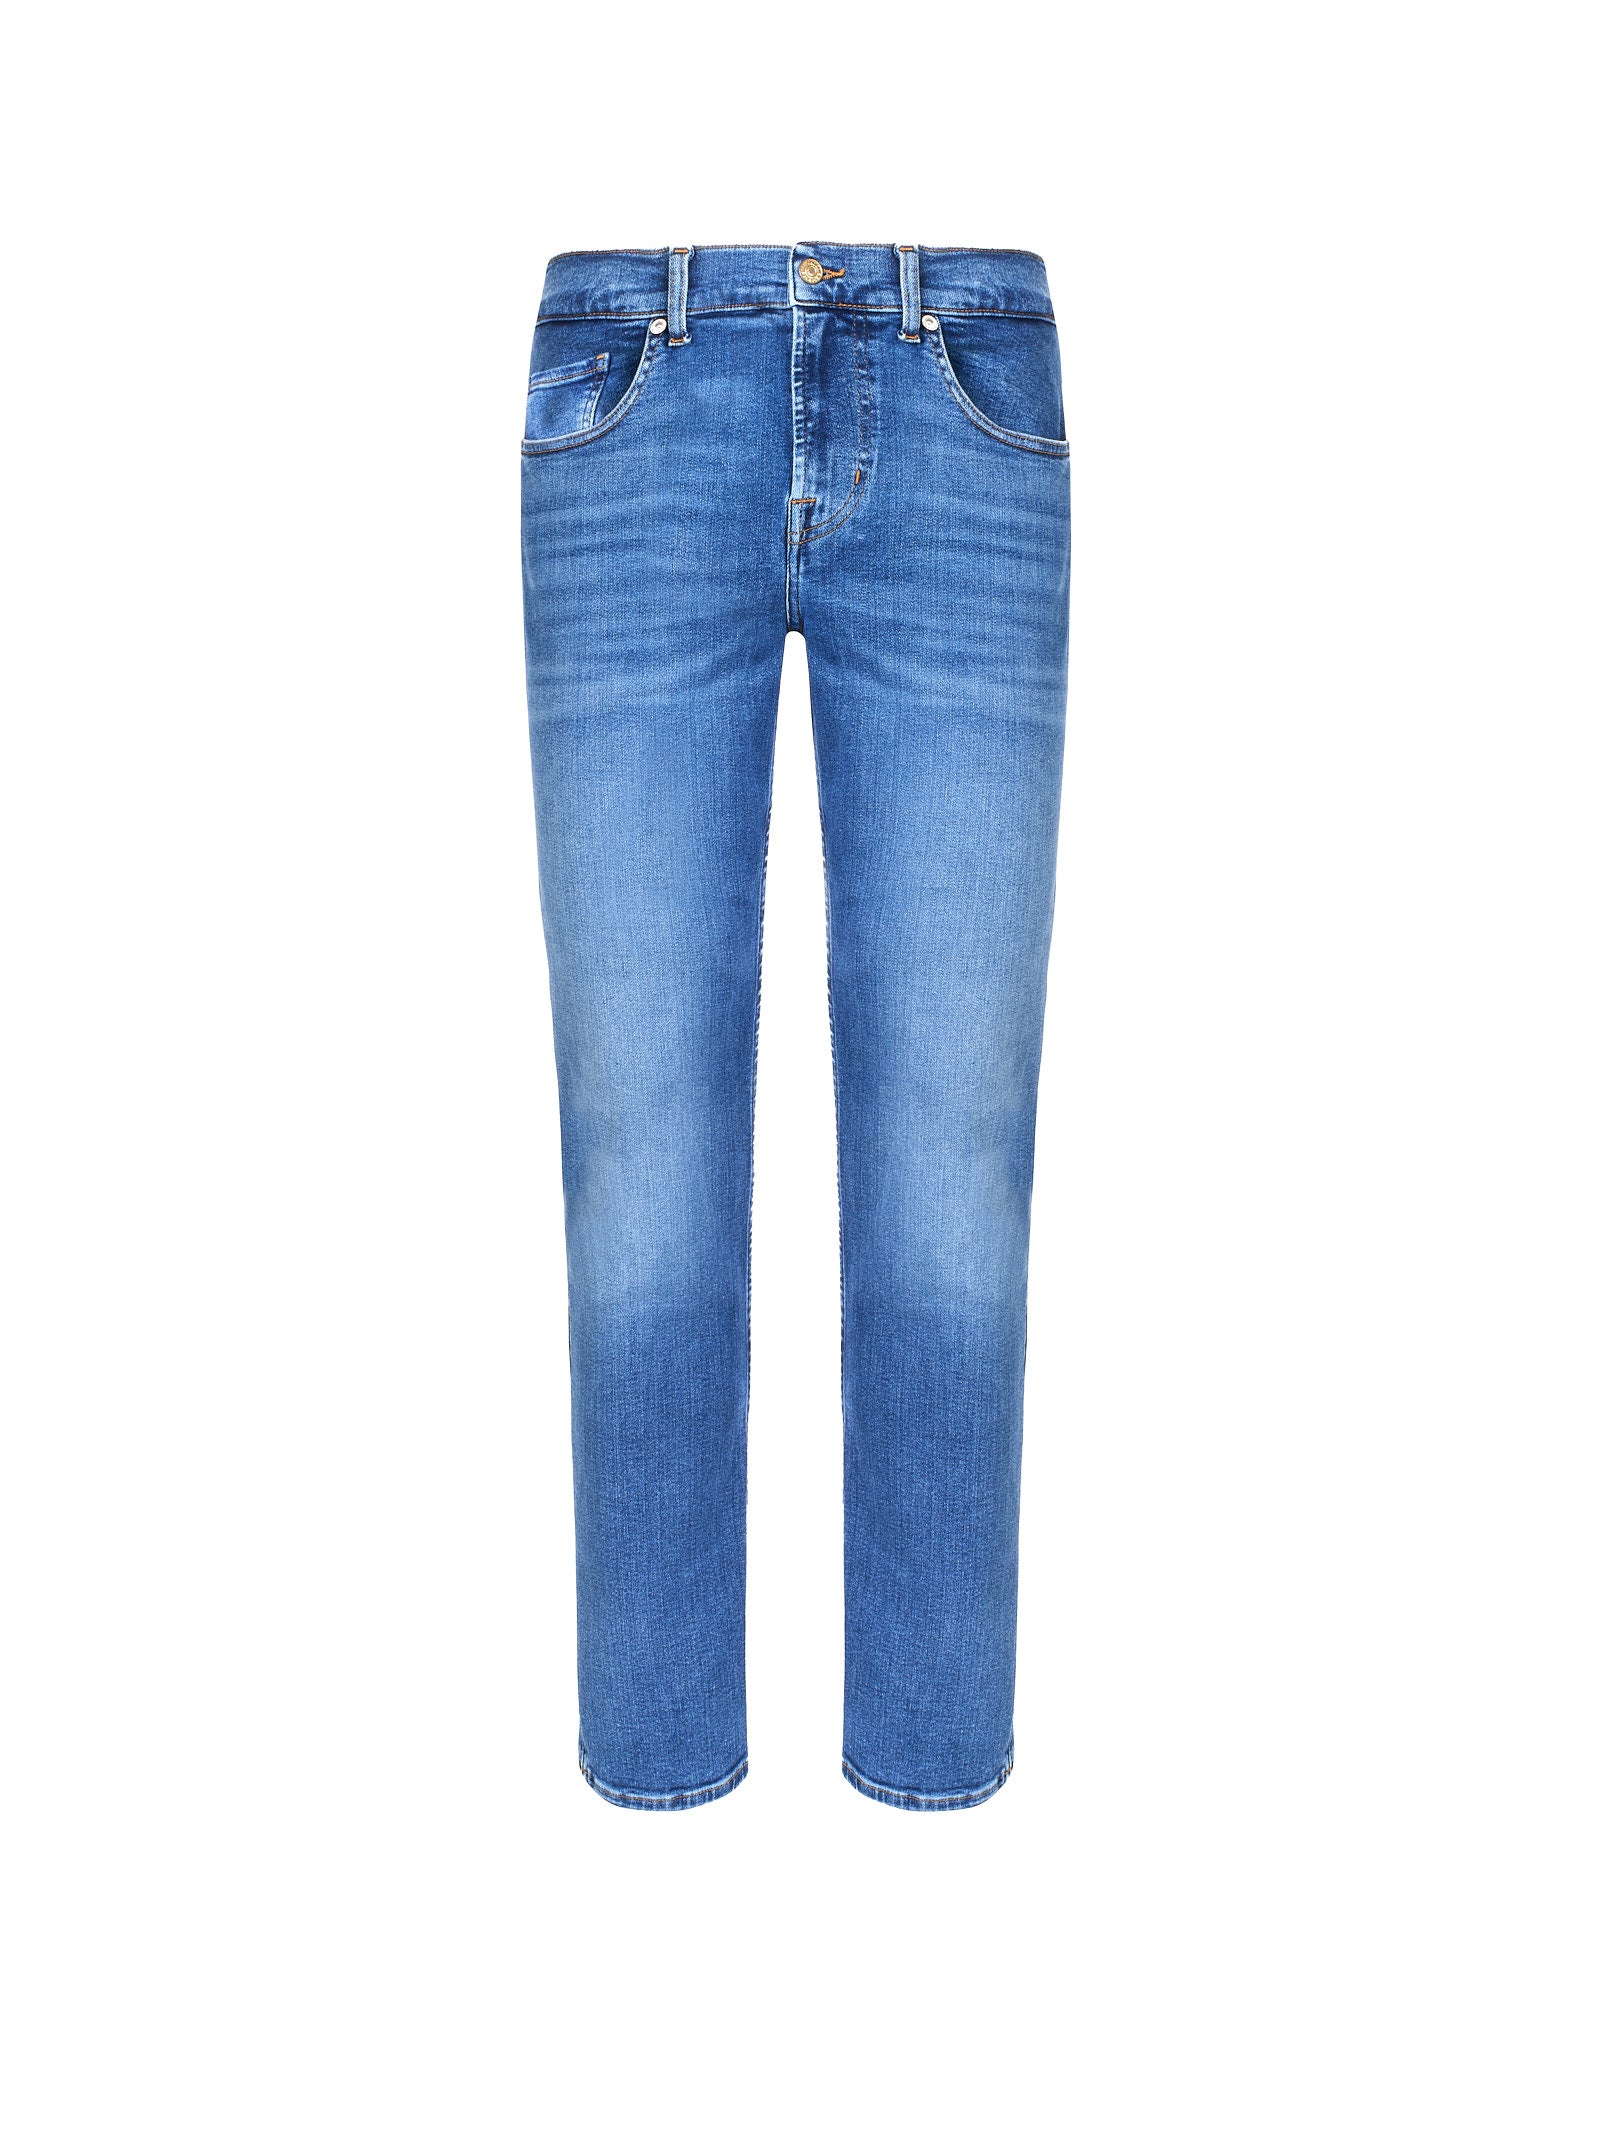 Jeans 7 FOR ALL MANKIND
Denim